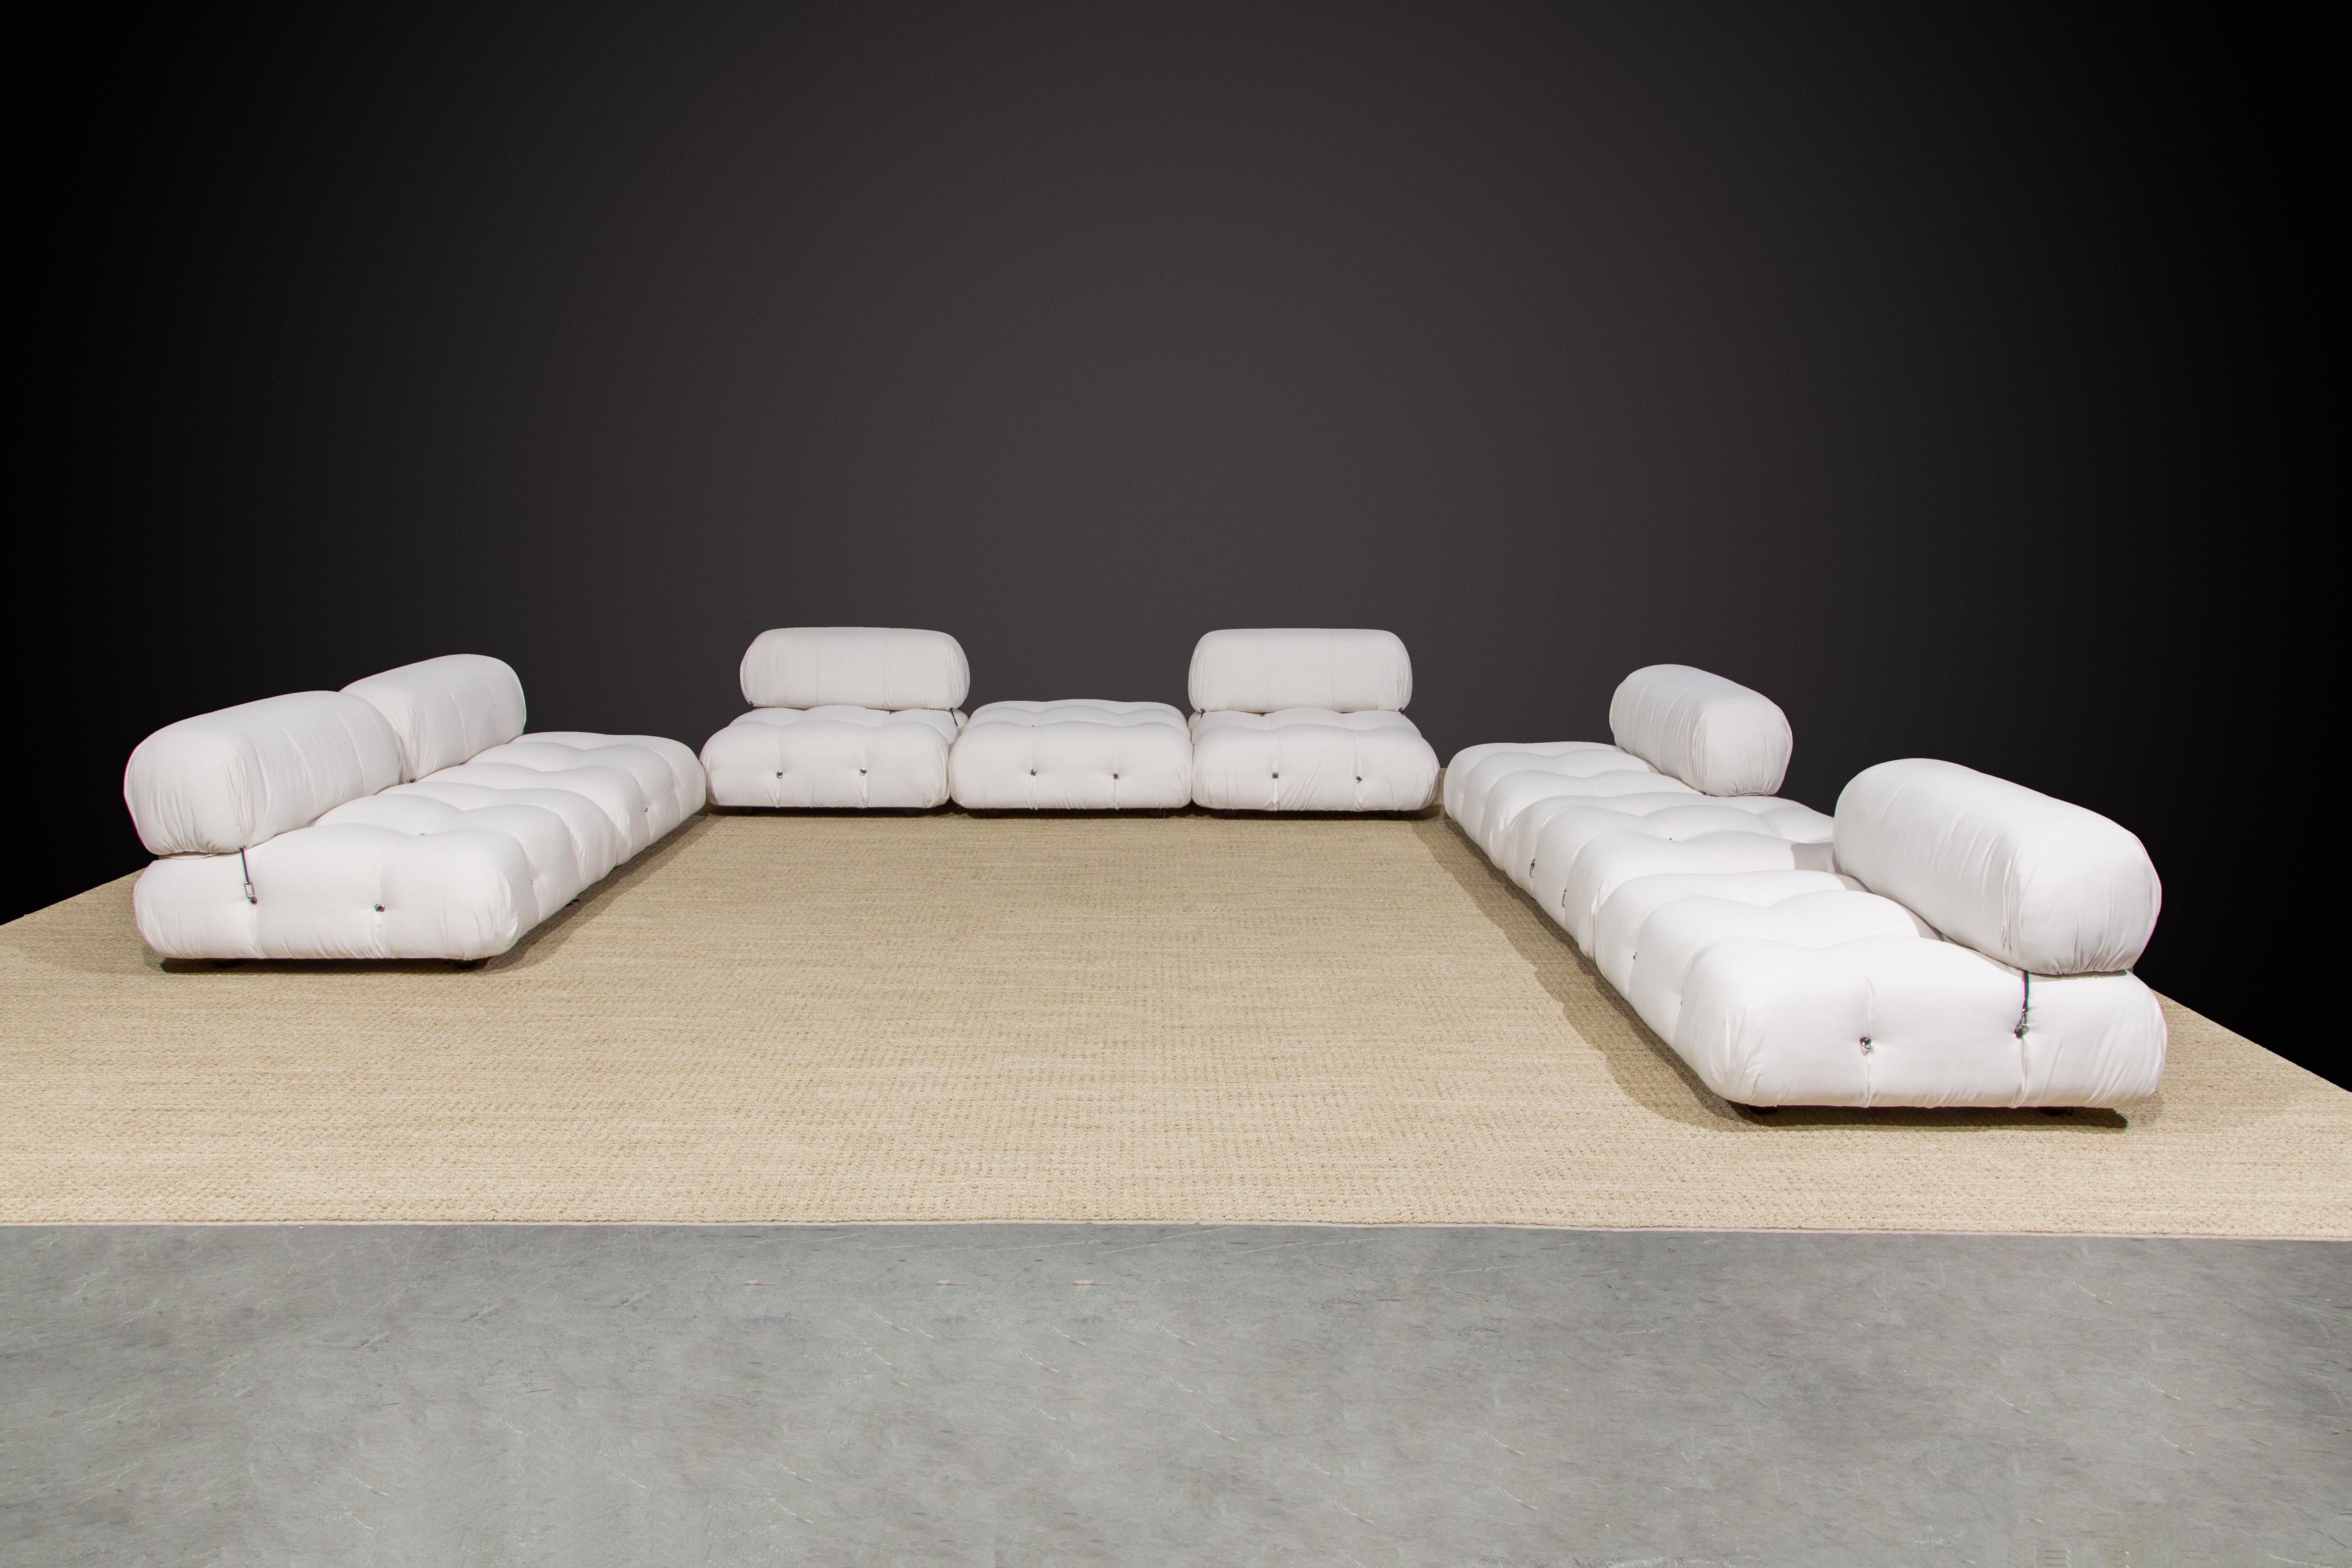 Modern Early 'Camaleonda' Sectional by Mario Bellini for C&B Italia, c 1971, Signed For Sale